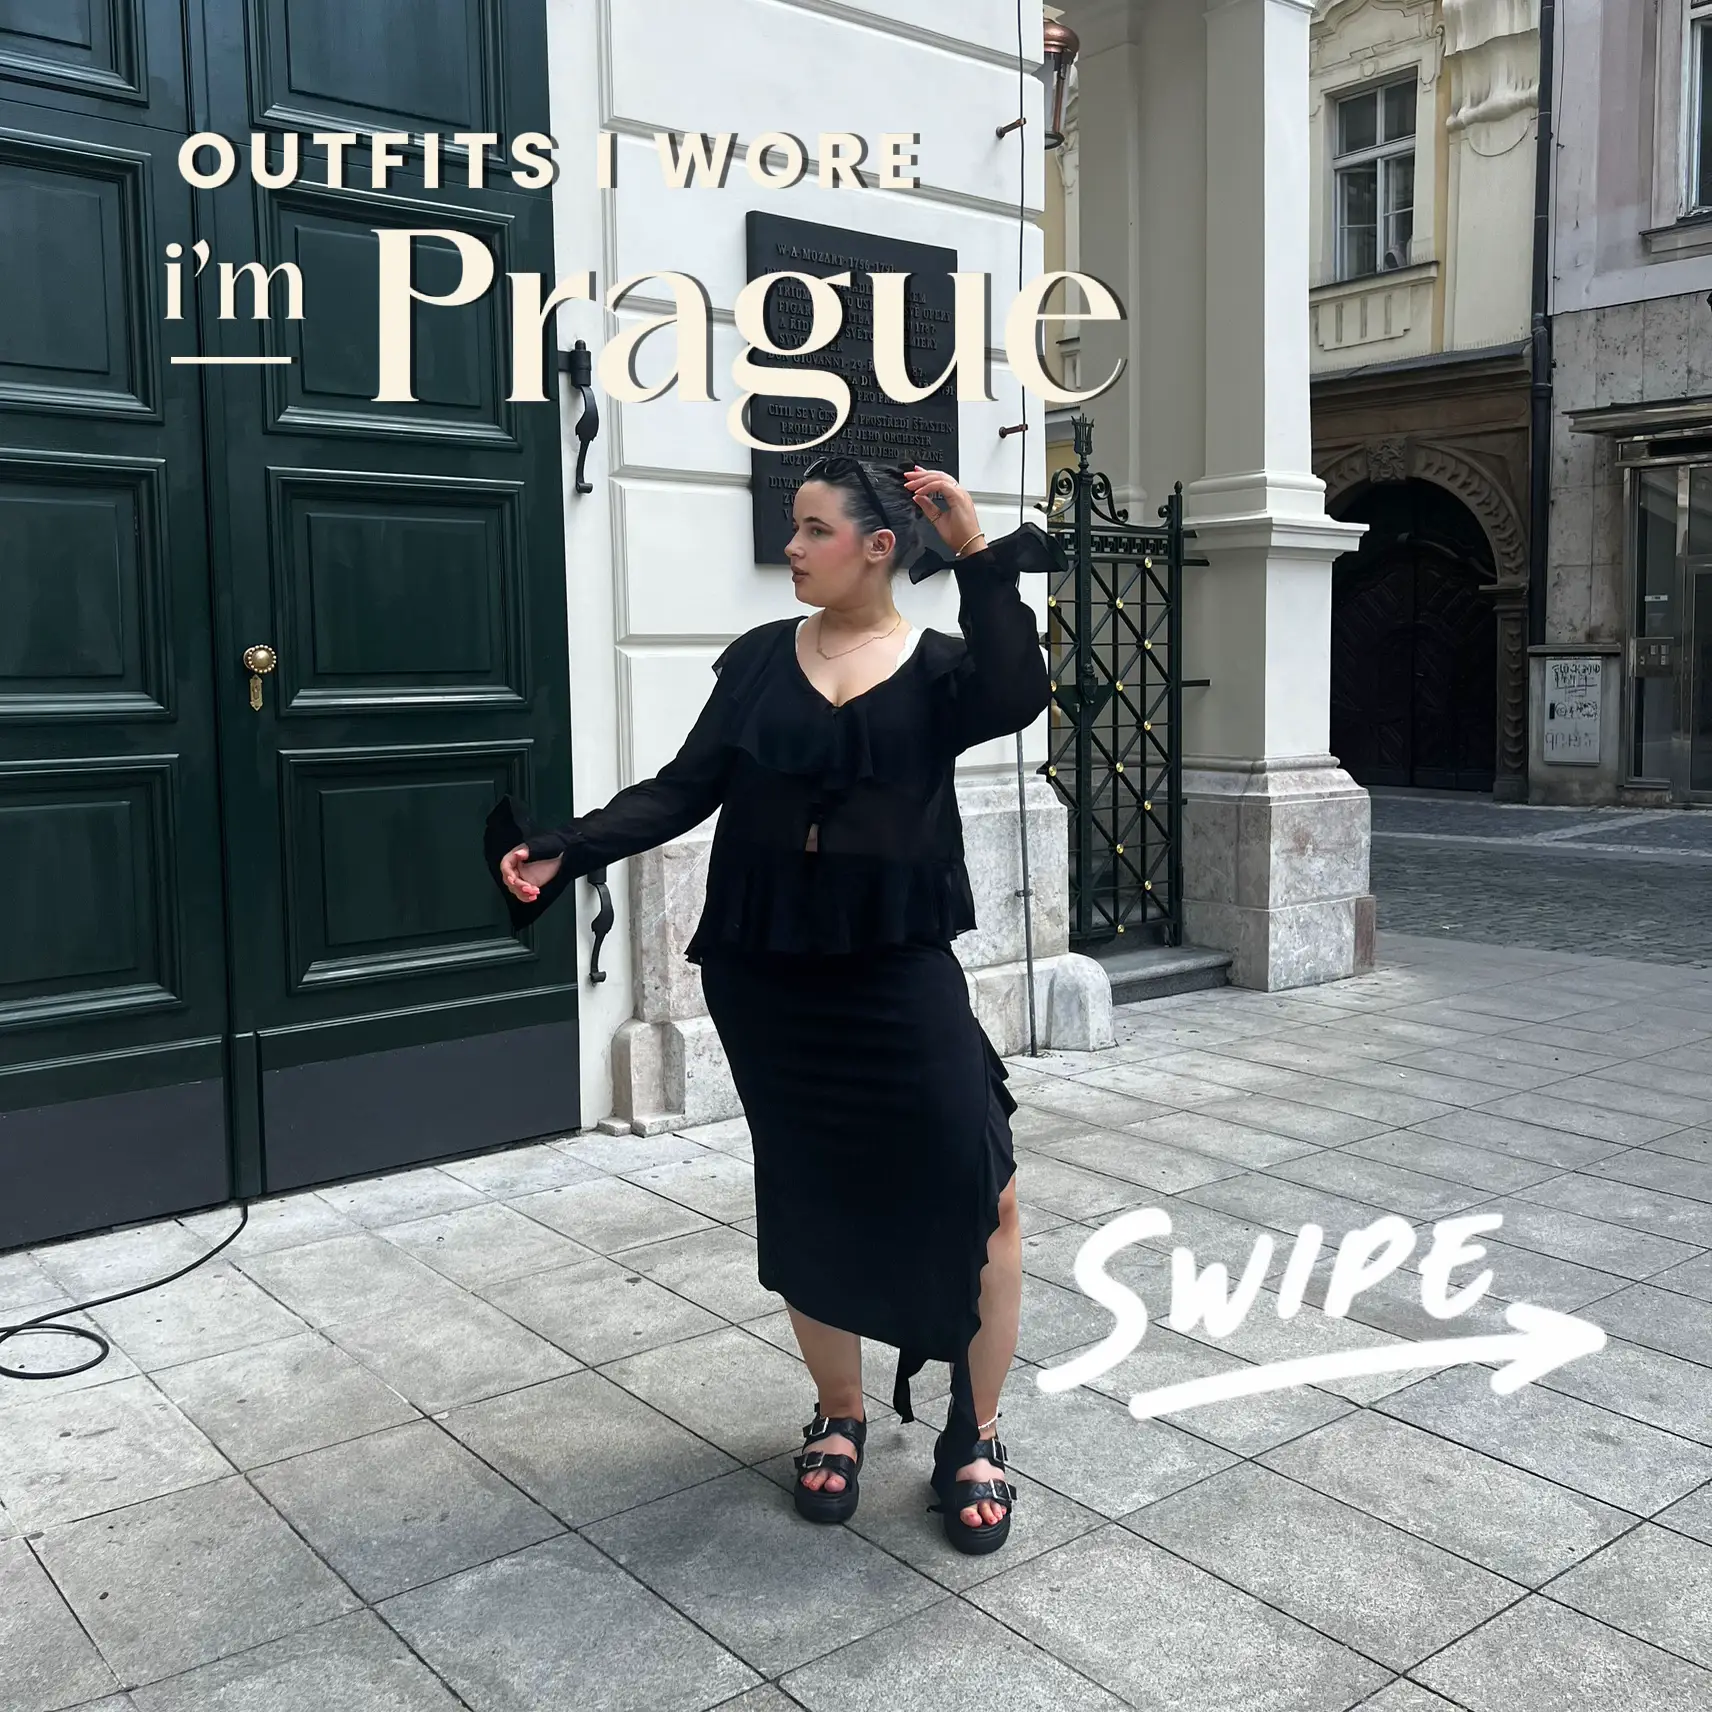 Outfits I wore in Prague 🇨🇿 | Gallery posted by Becca Jayne | Lemon8